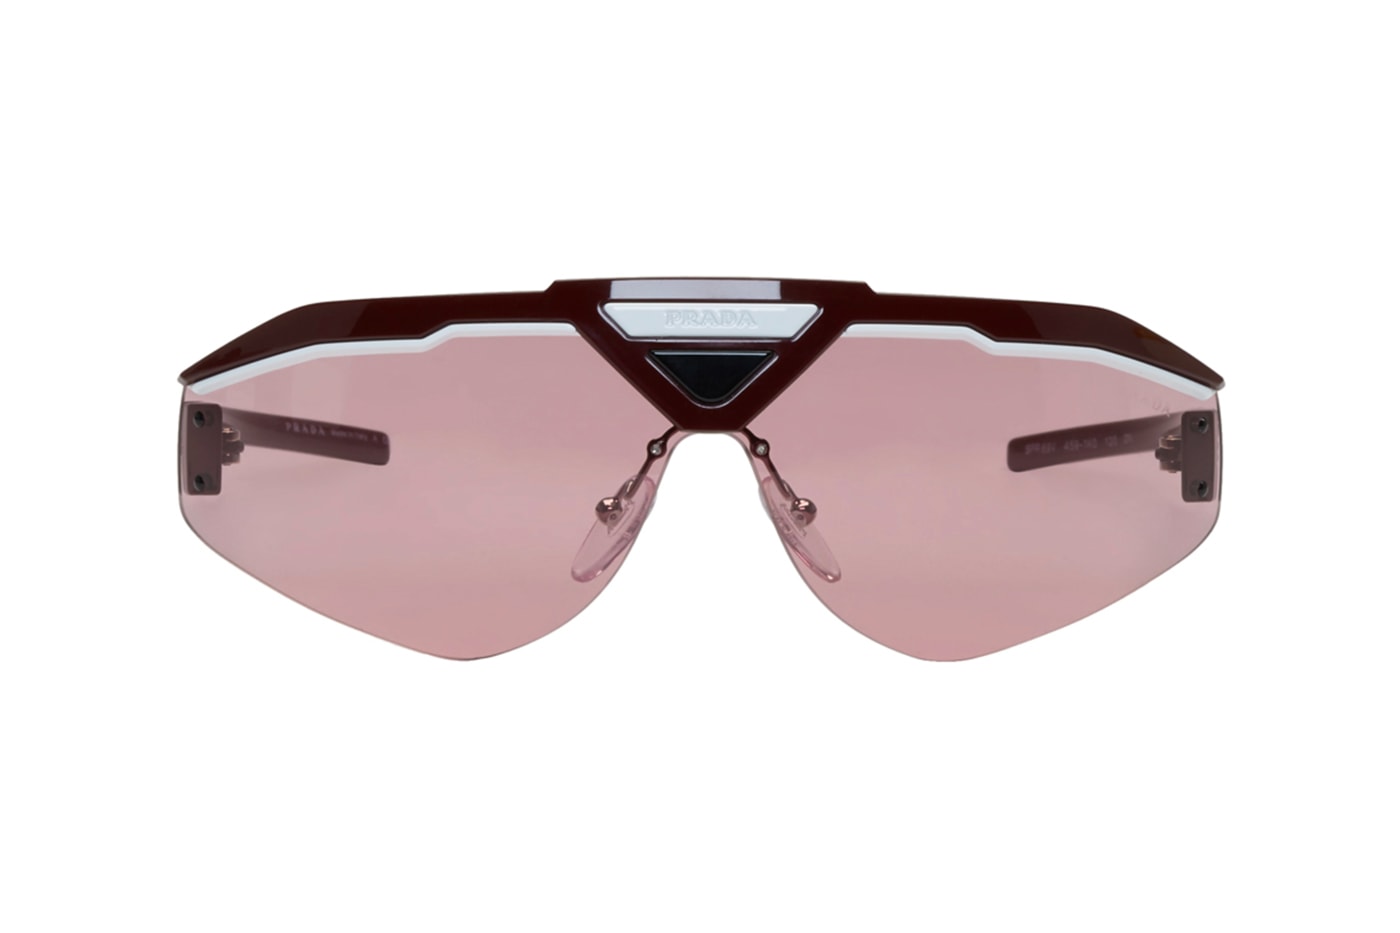 Prada FW19 Sunglasses Release Info italy black rubberized 192962M134514 drop date Green Mirrored Lens 192962M134516 Pink and Red Runway 192962M134519